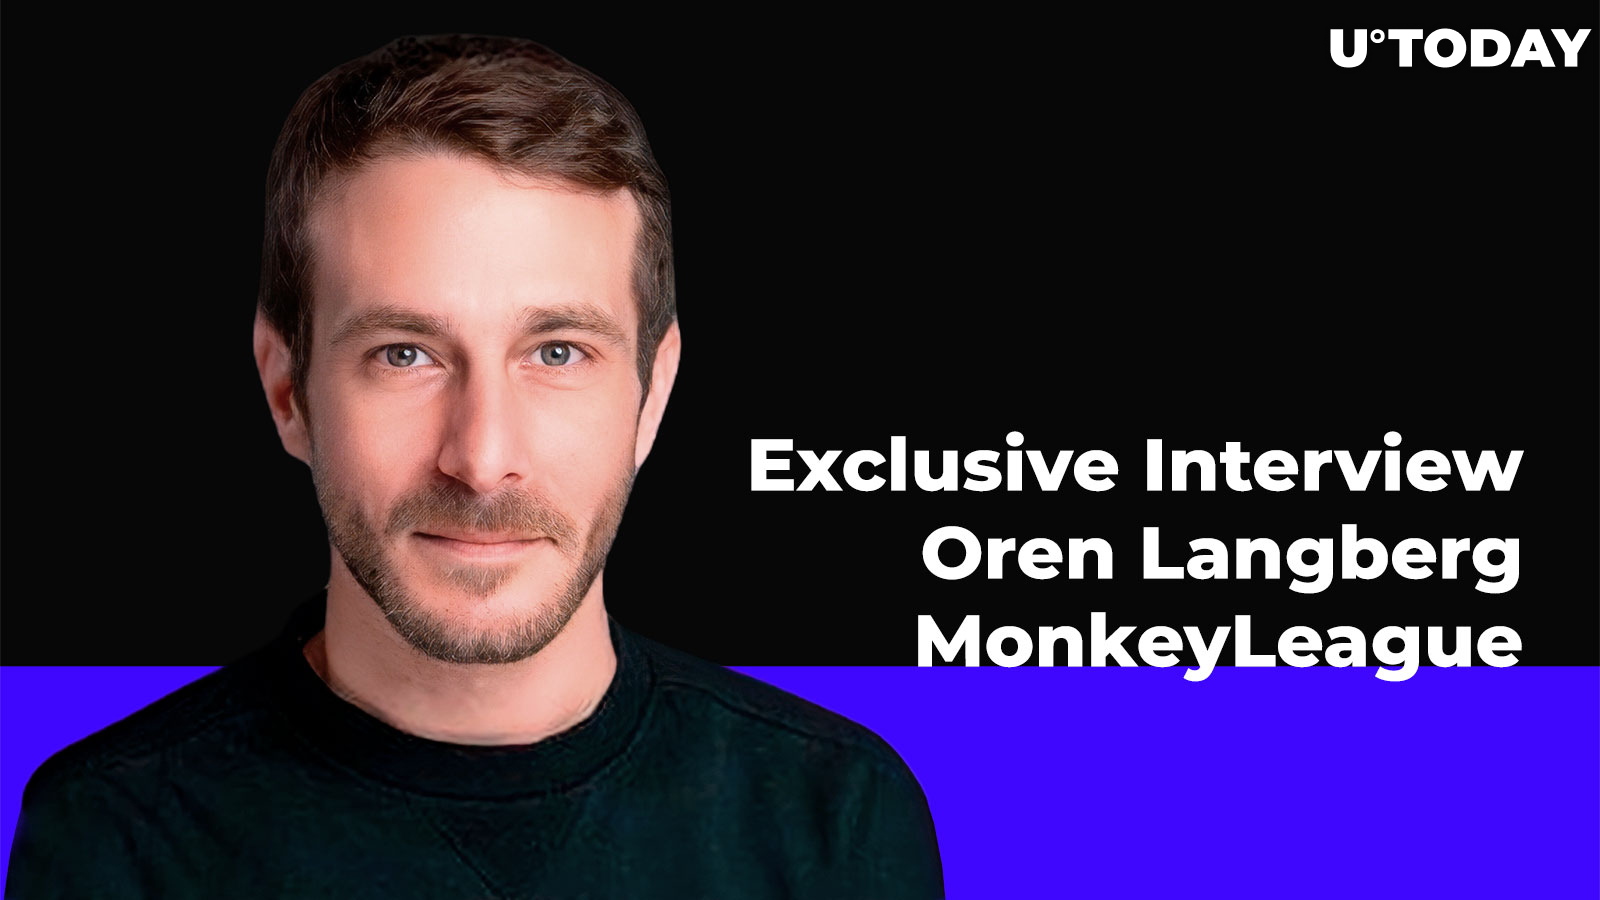 Exclusive Interview with MonkeyLeague CMO on How Web3 Gaming Blurs Line Between Reality and Virtual Worlds